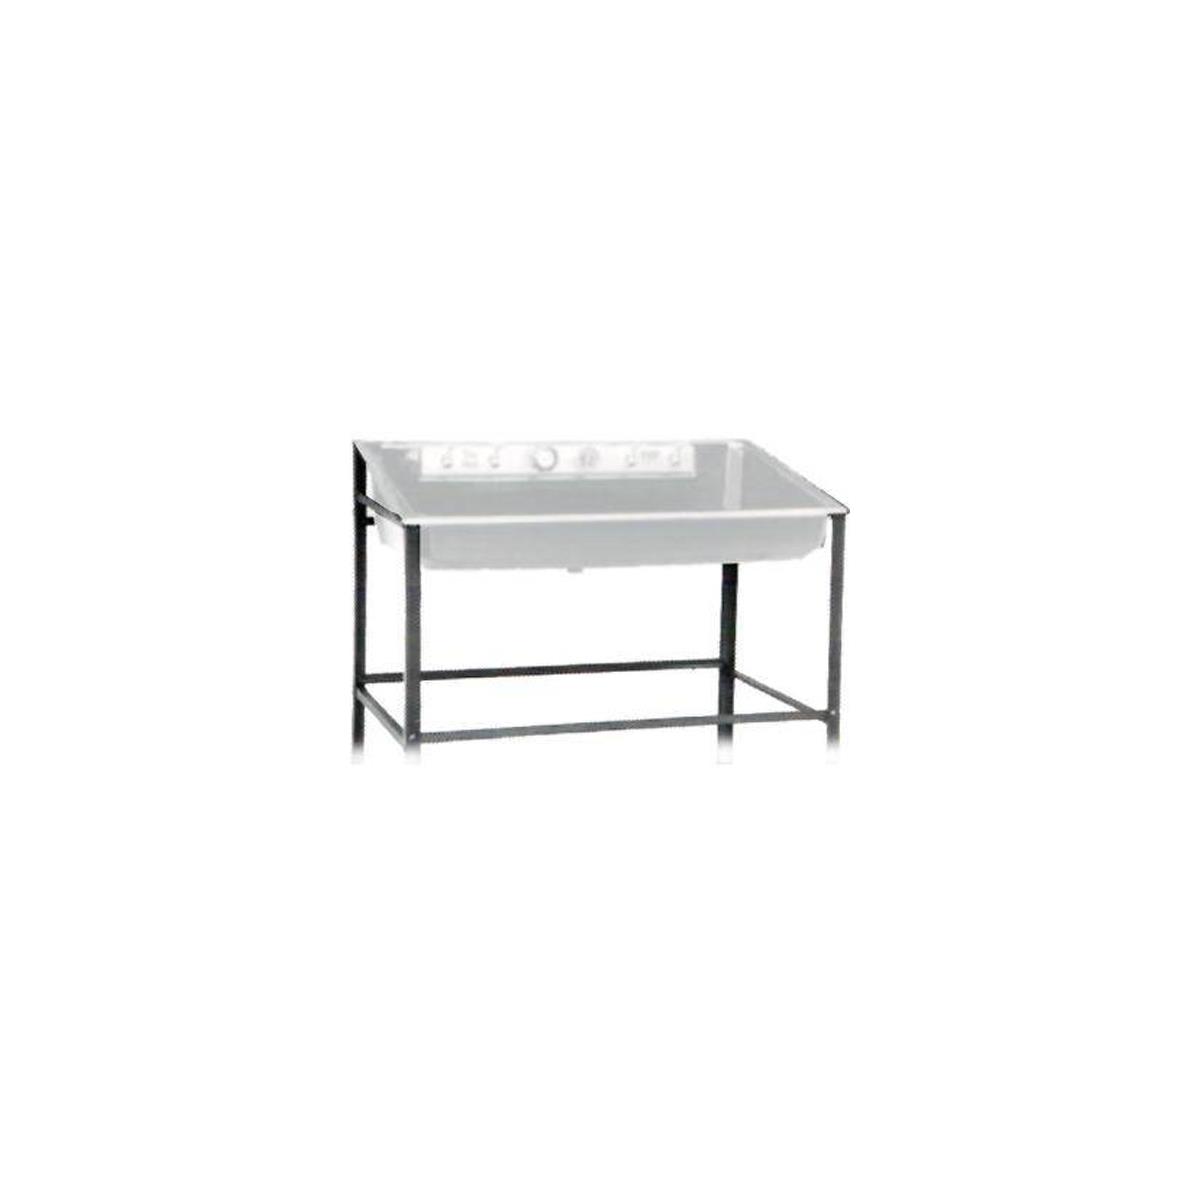 Image of Delta Adorama / Delta Steel Sink Stand for Sinks 72in x 33in